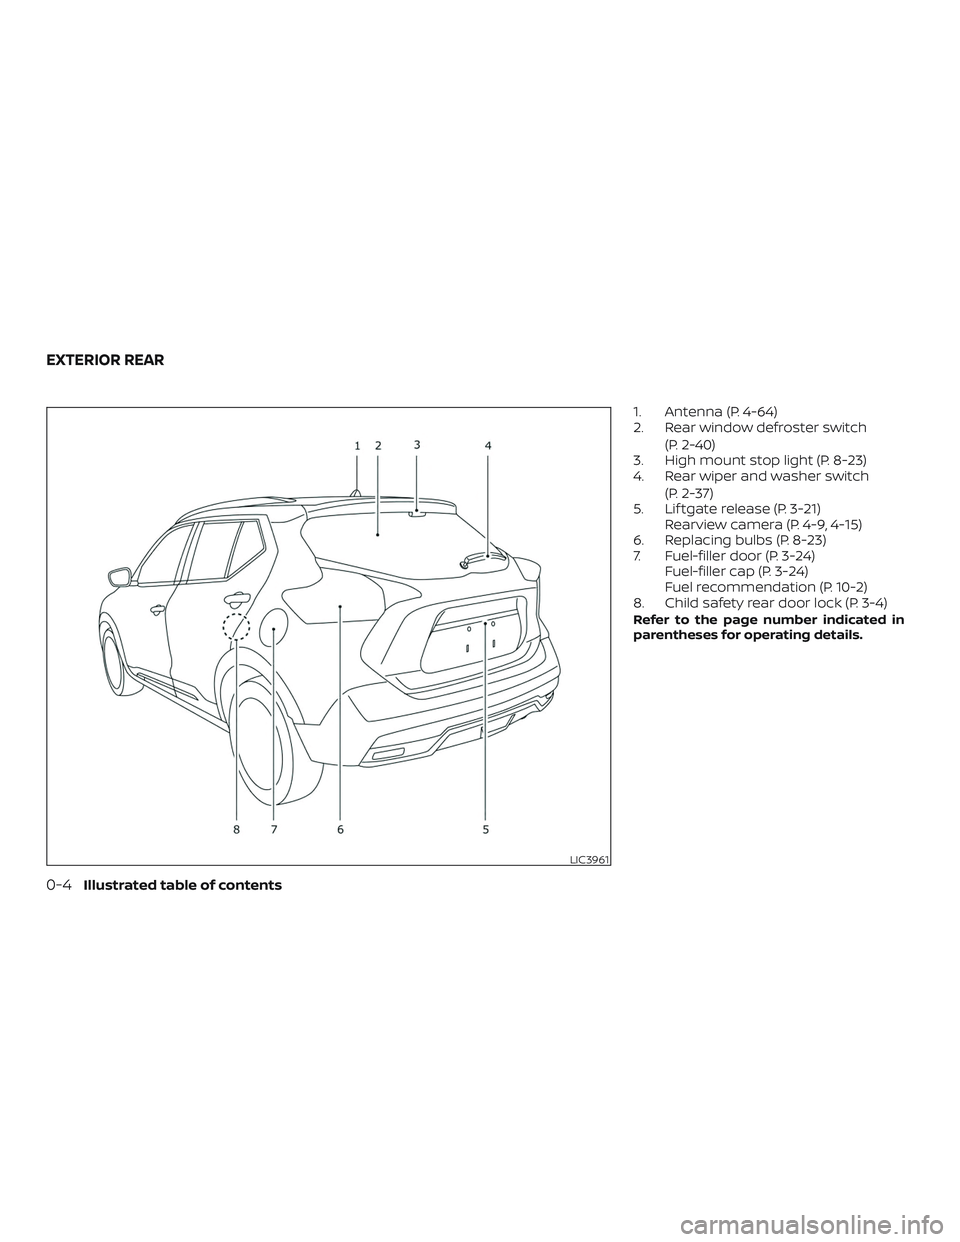 NISSAN KICKS 2018  Owner´s Manual 1. Antenna (P. 4-64)
2. Rear window defroster switch(P. 2-40)
3. High mount stop light (P. 8-23)
4. Rear wiper and washer switch
(P. 2-37)
5. Lif tgate release (P. 3-21) Rearview camera (P. 4-9, 4-15)